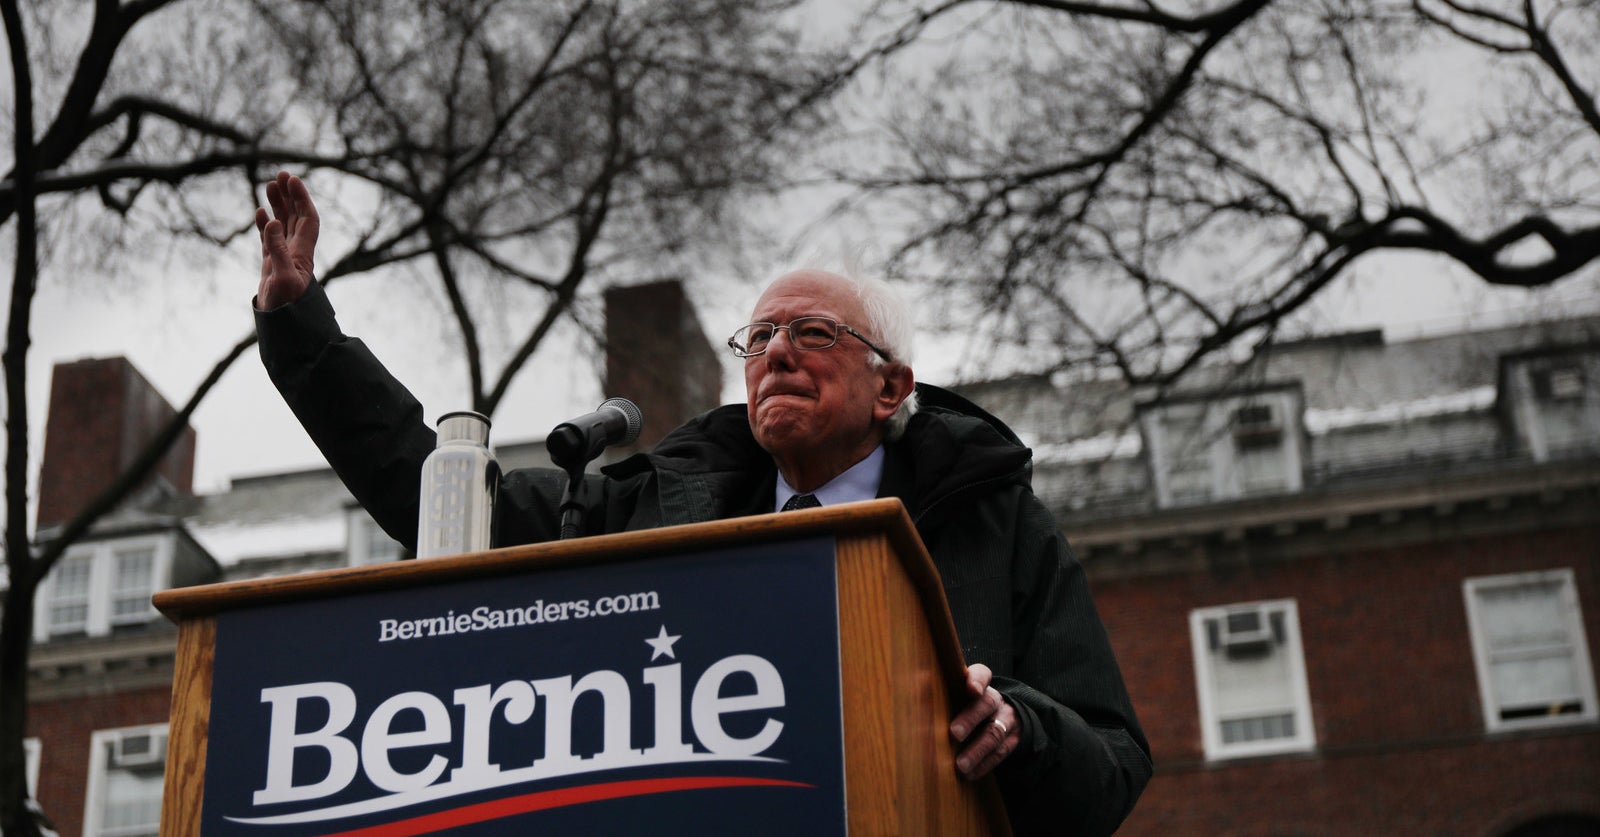 Bernie Sanders Campaign Says He Will Keep His Pledge To Not Go Negative In Ads For 2020 